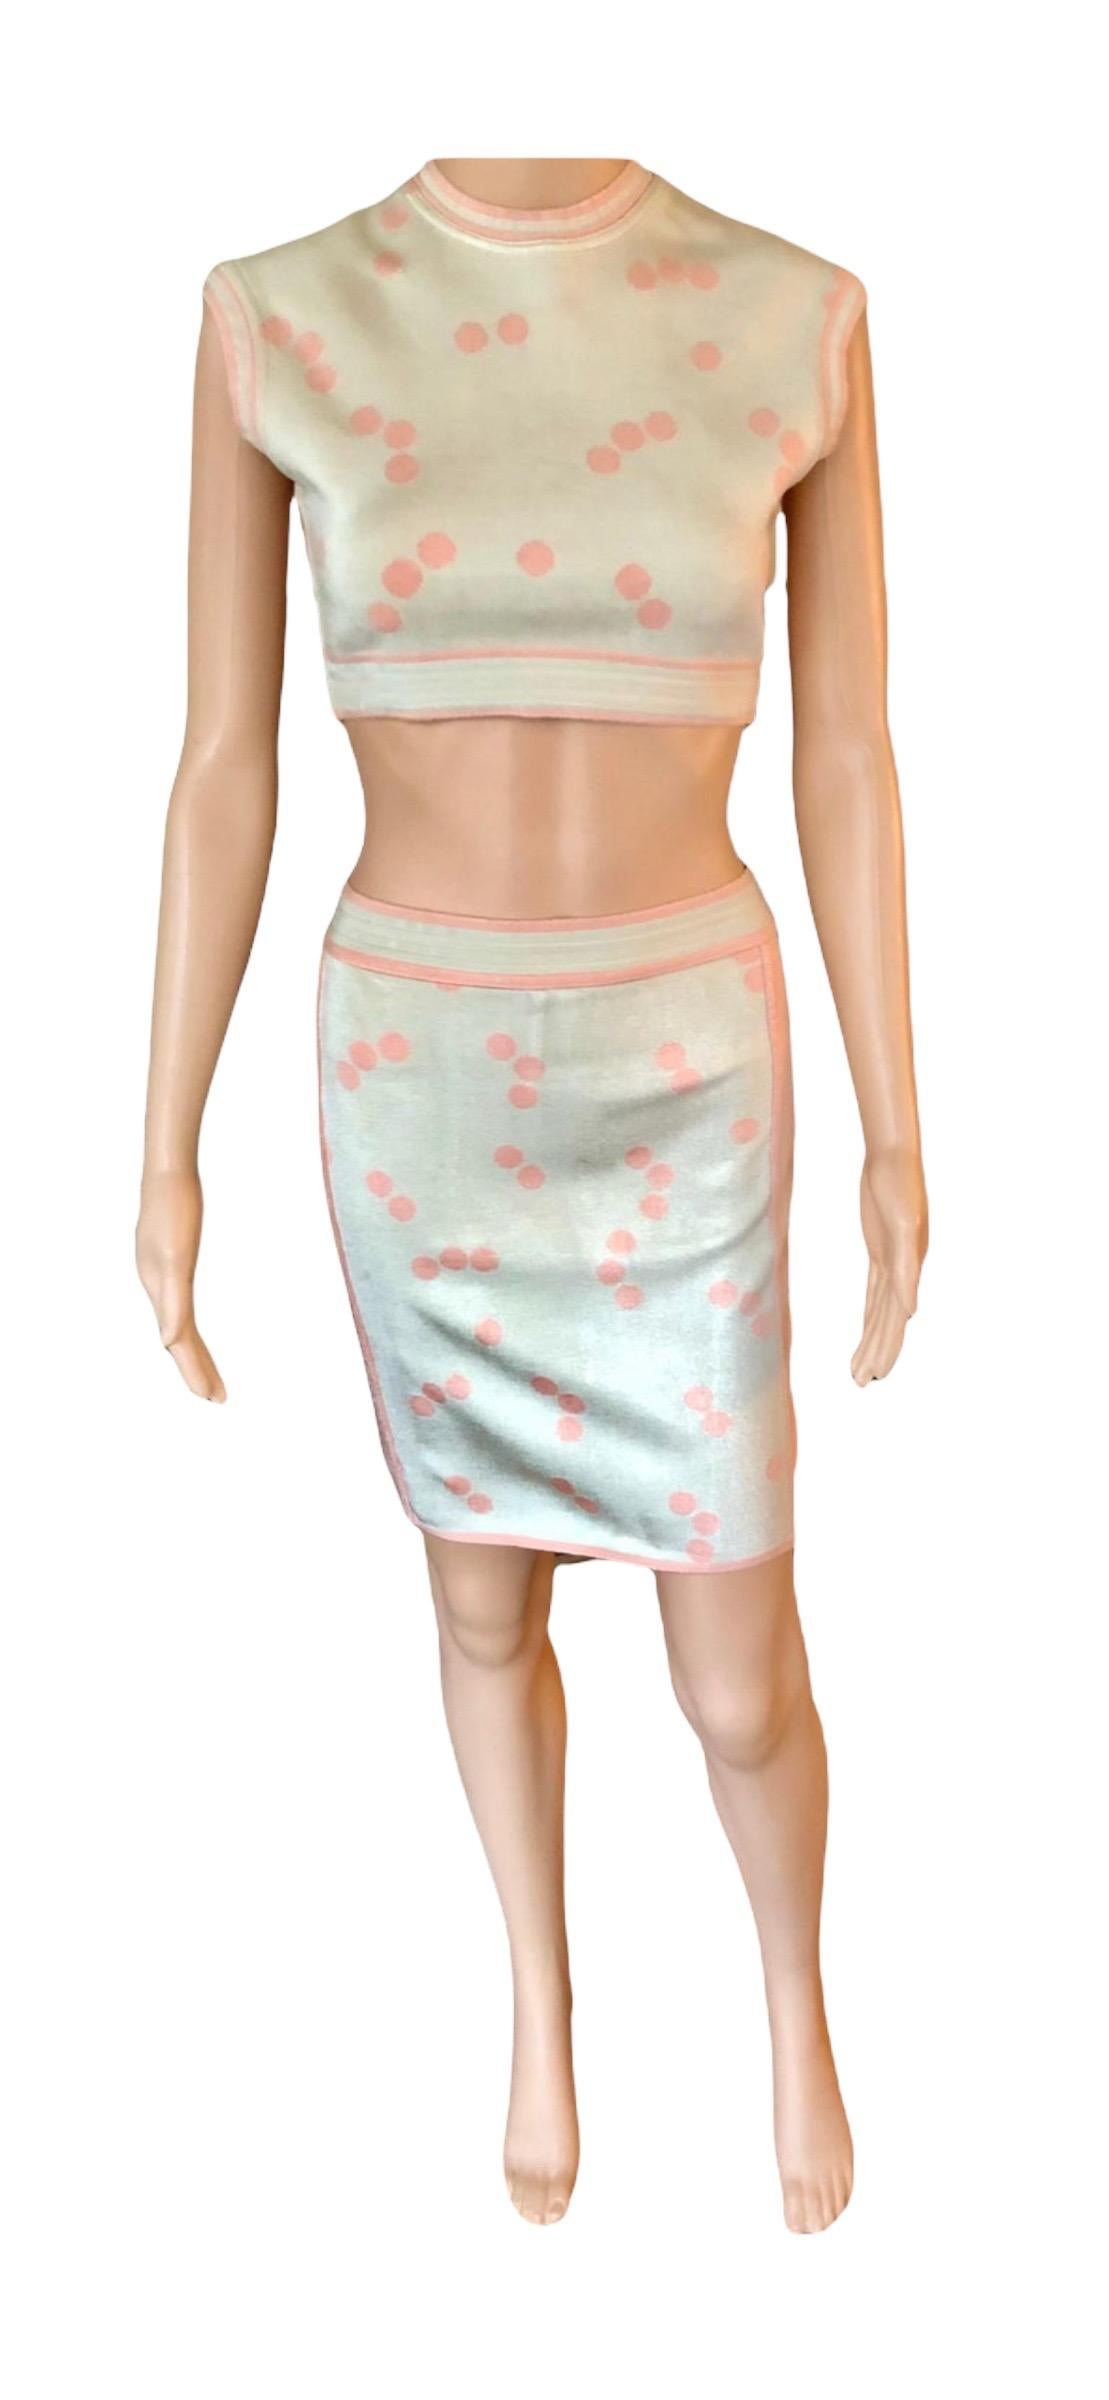 Azzedine Alaia S/S 1991 Vintage Skirt and Crop Top 2 Piece Set  For Sale 4